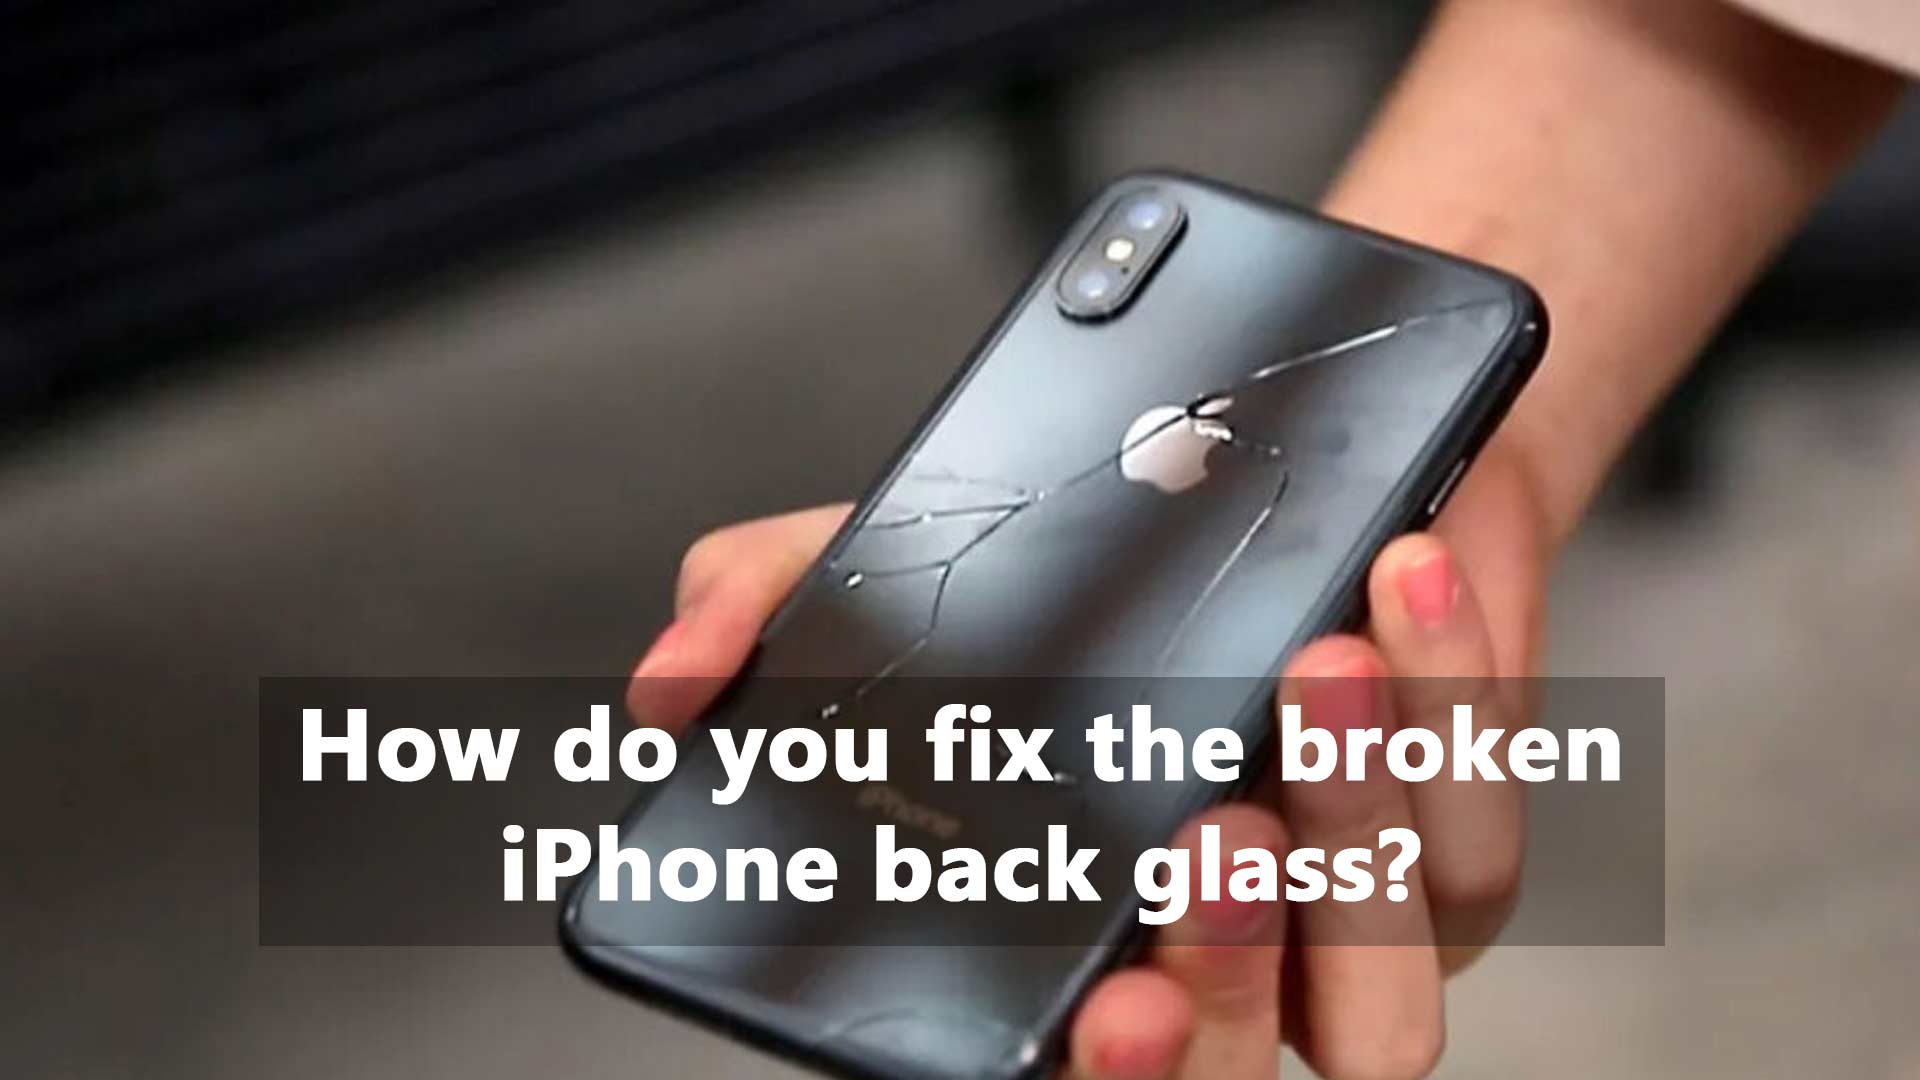 How do you fix the broken iPhone back glass?